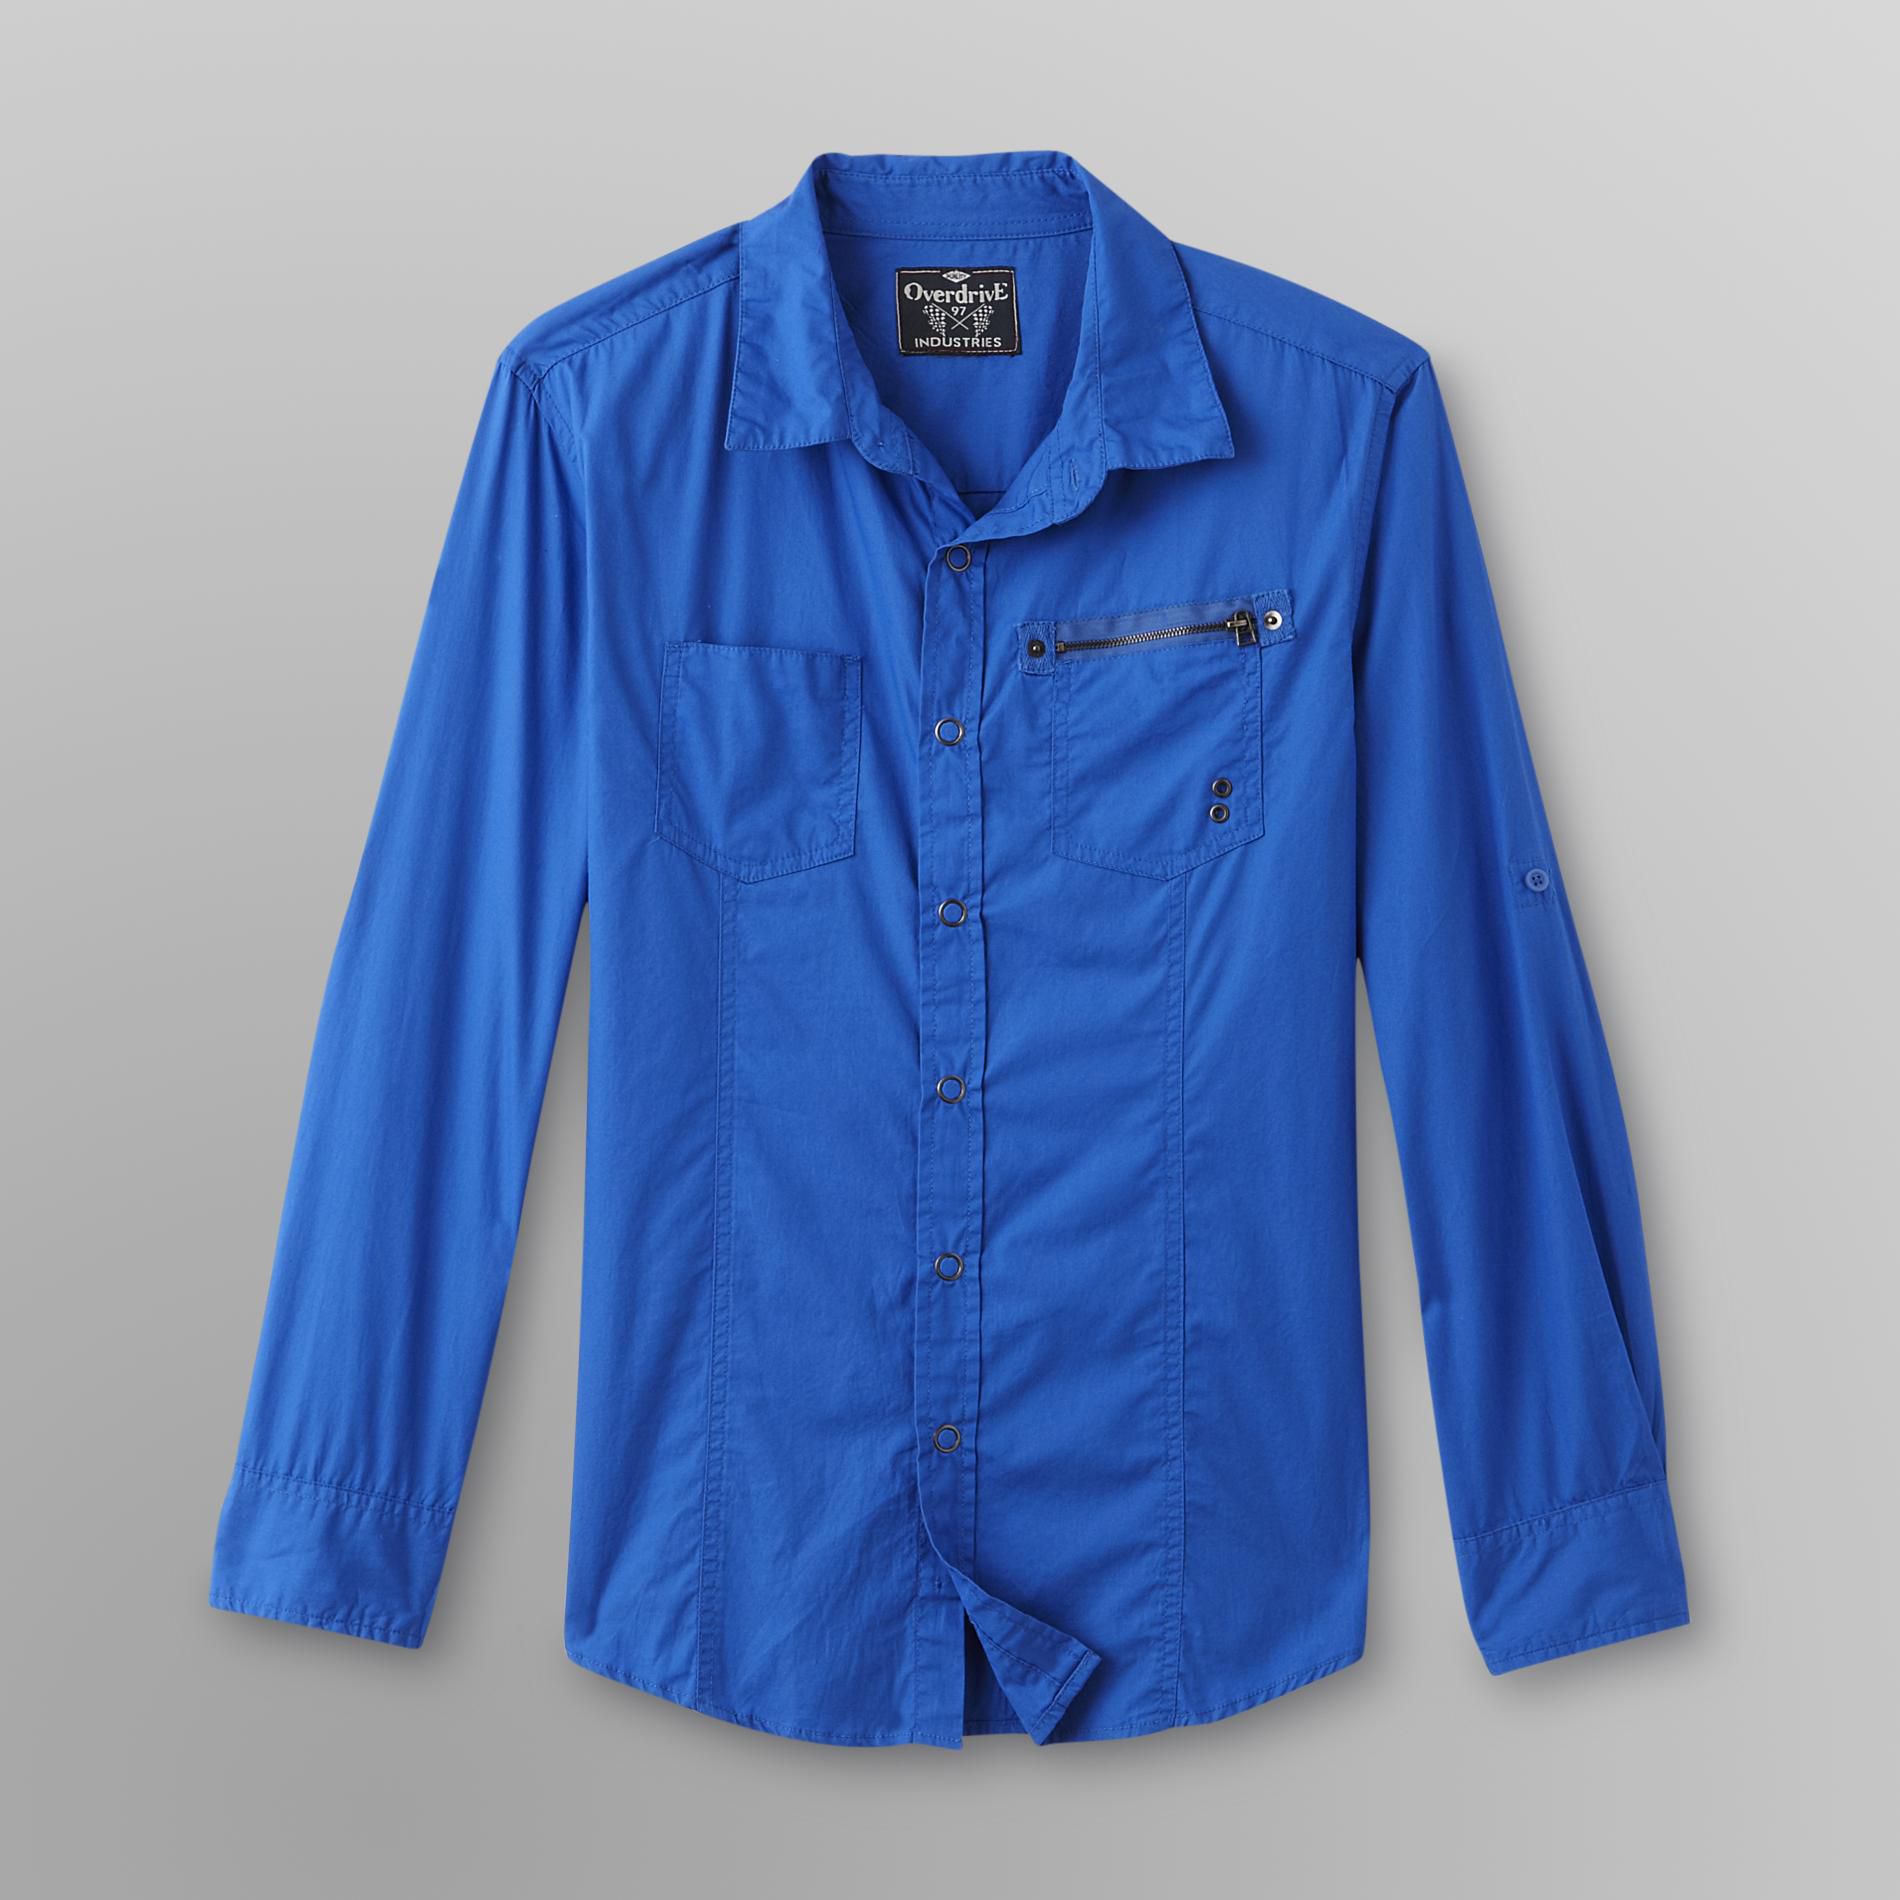 Overdrive Young Men's Utility Shirt